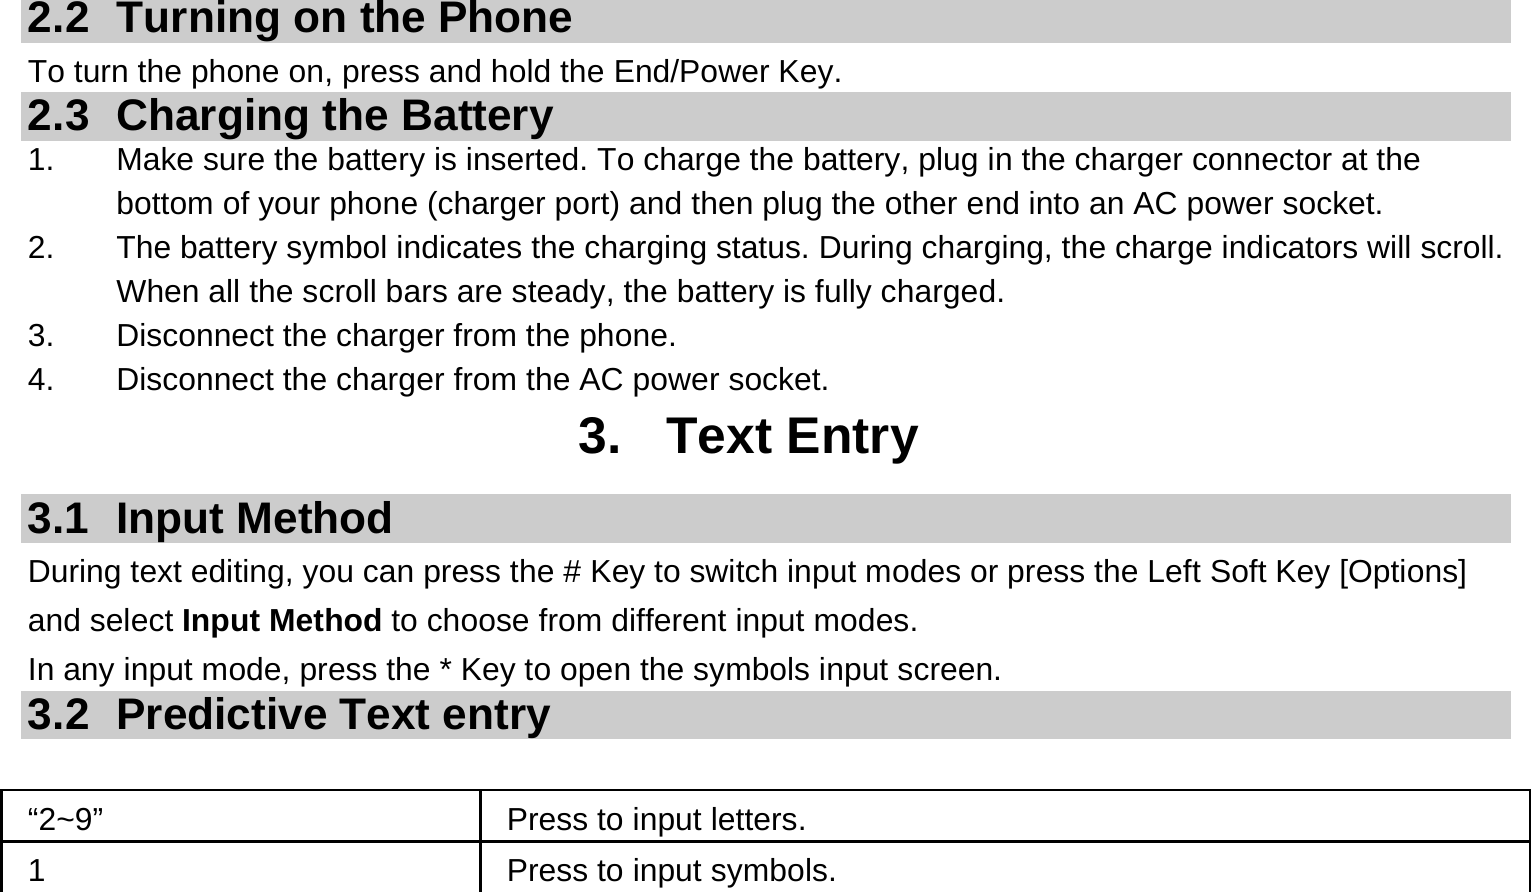   2.2  Turning on the Phone   To turn the phone on, press and hold the End/Power Key.   2.3 Charging the Battery 1.  Make sure the battery is inserted. To charge the battery, plug in the charger connector at the bottom of your phone (charger port) and then plug the other end into an AC power socket. 2.  The battery symbol indicates the charging status. During charging, the charge indicators will scroll. When all the scroll bars are steady, the battery is fully charged.   3.  Disconnect the charger from the phone. 4.  Disconnect the charger from the AC power socket. 3. Text Entry 3.1 Input Method During text editing, you can press the # Key to switch input modes or press the Left Soft Key [Options] and select Input Method to choose from different input modes. In any input mode, press the * Key to open the symbols input screen.   3.2 Predictive Text entry  “2~9”     Press to input letters. 1  Press to input symbols. 